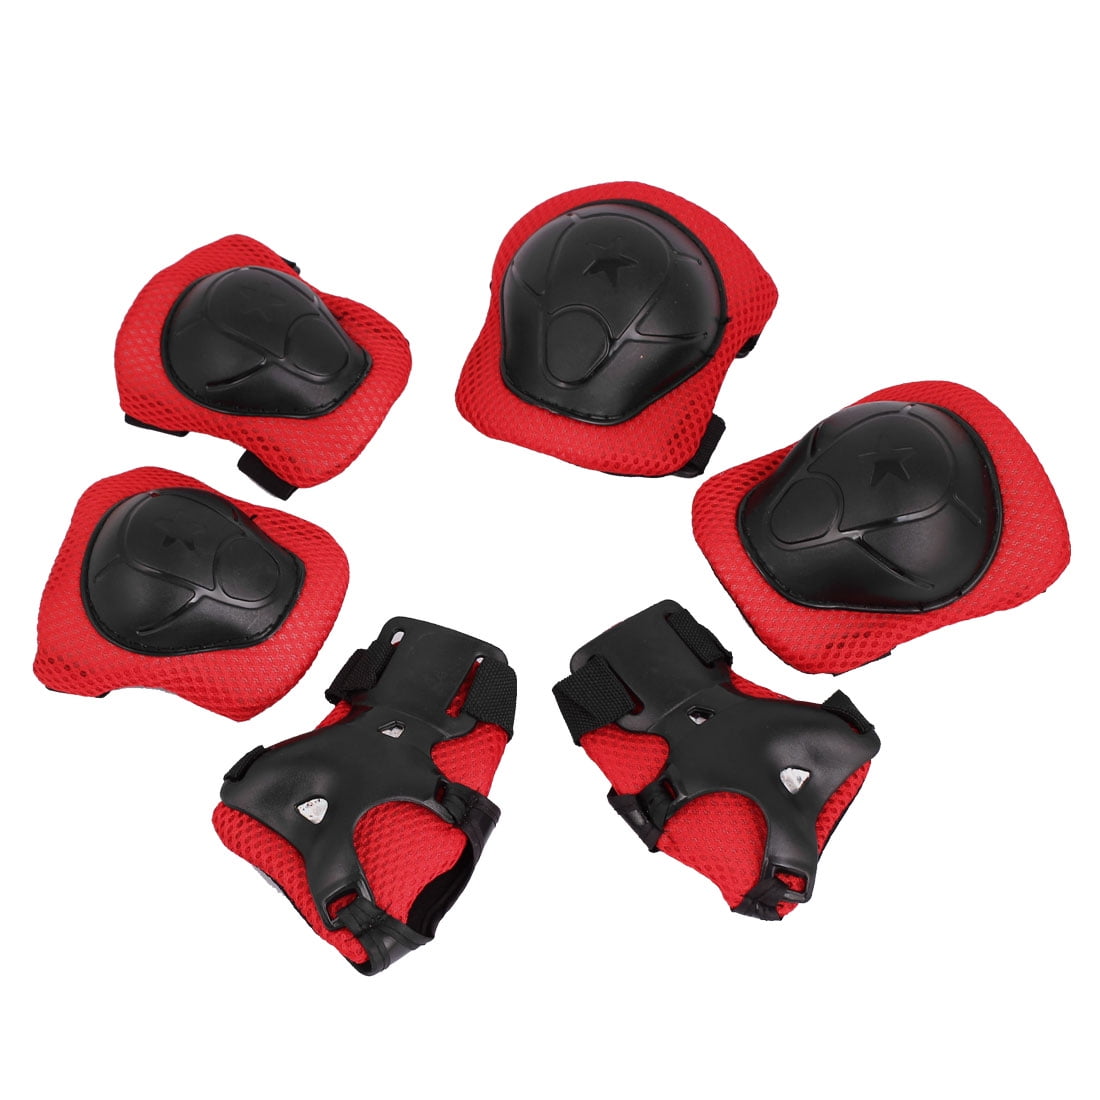 Kids Cycling Bike Protective Pads Set 6pcs also for Scooter/Skateboard use Red 